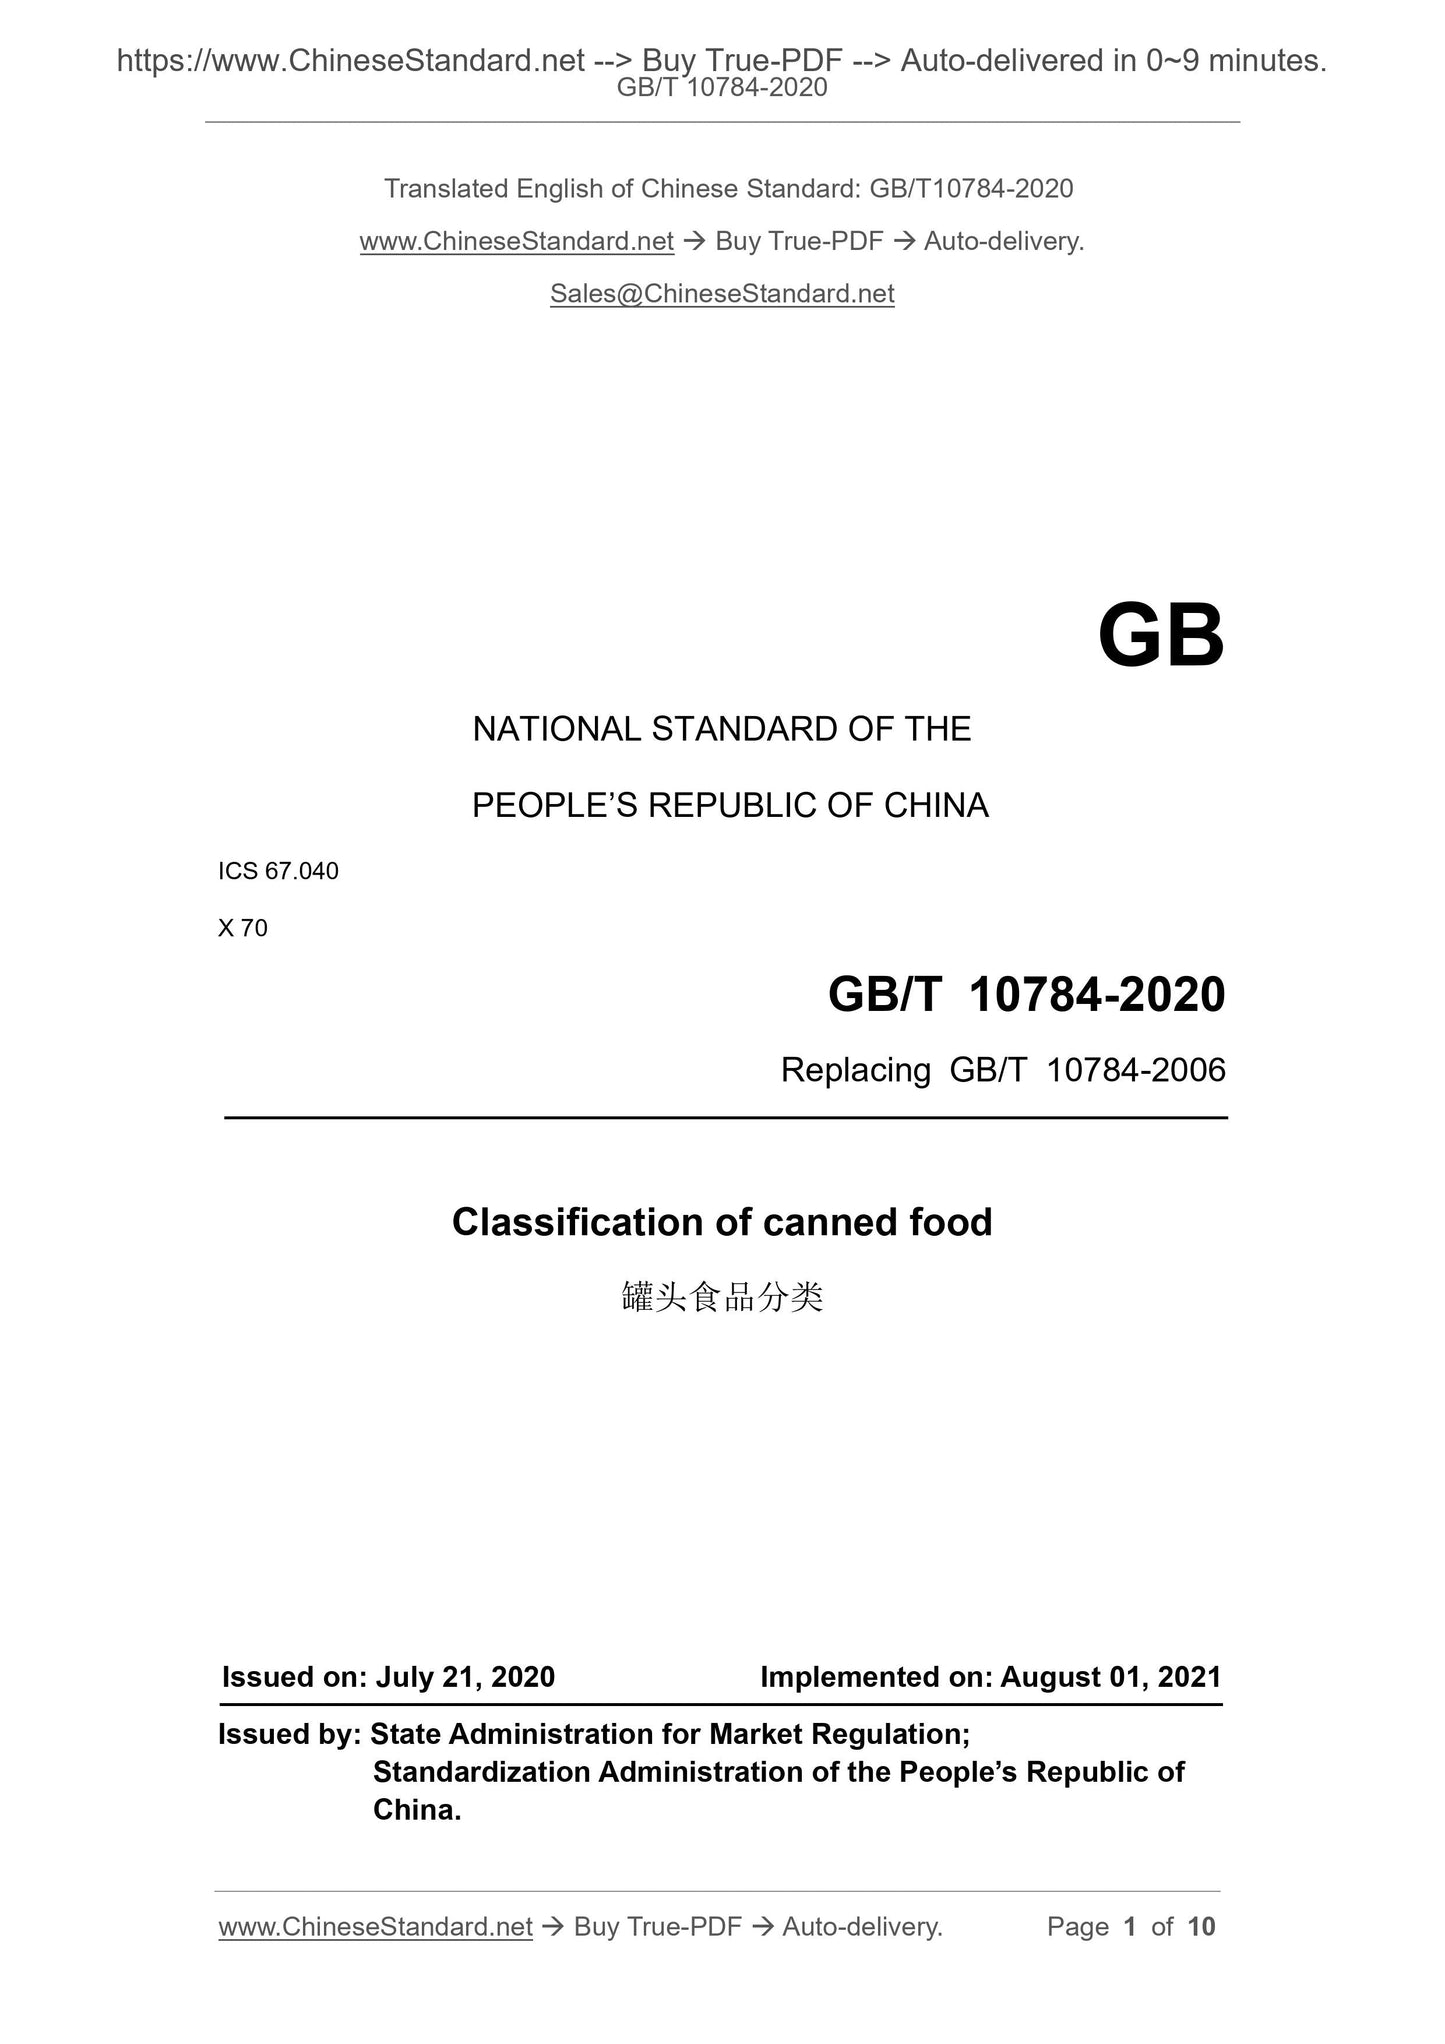 GB/T 10784-2020 Page 1